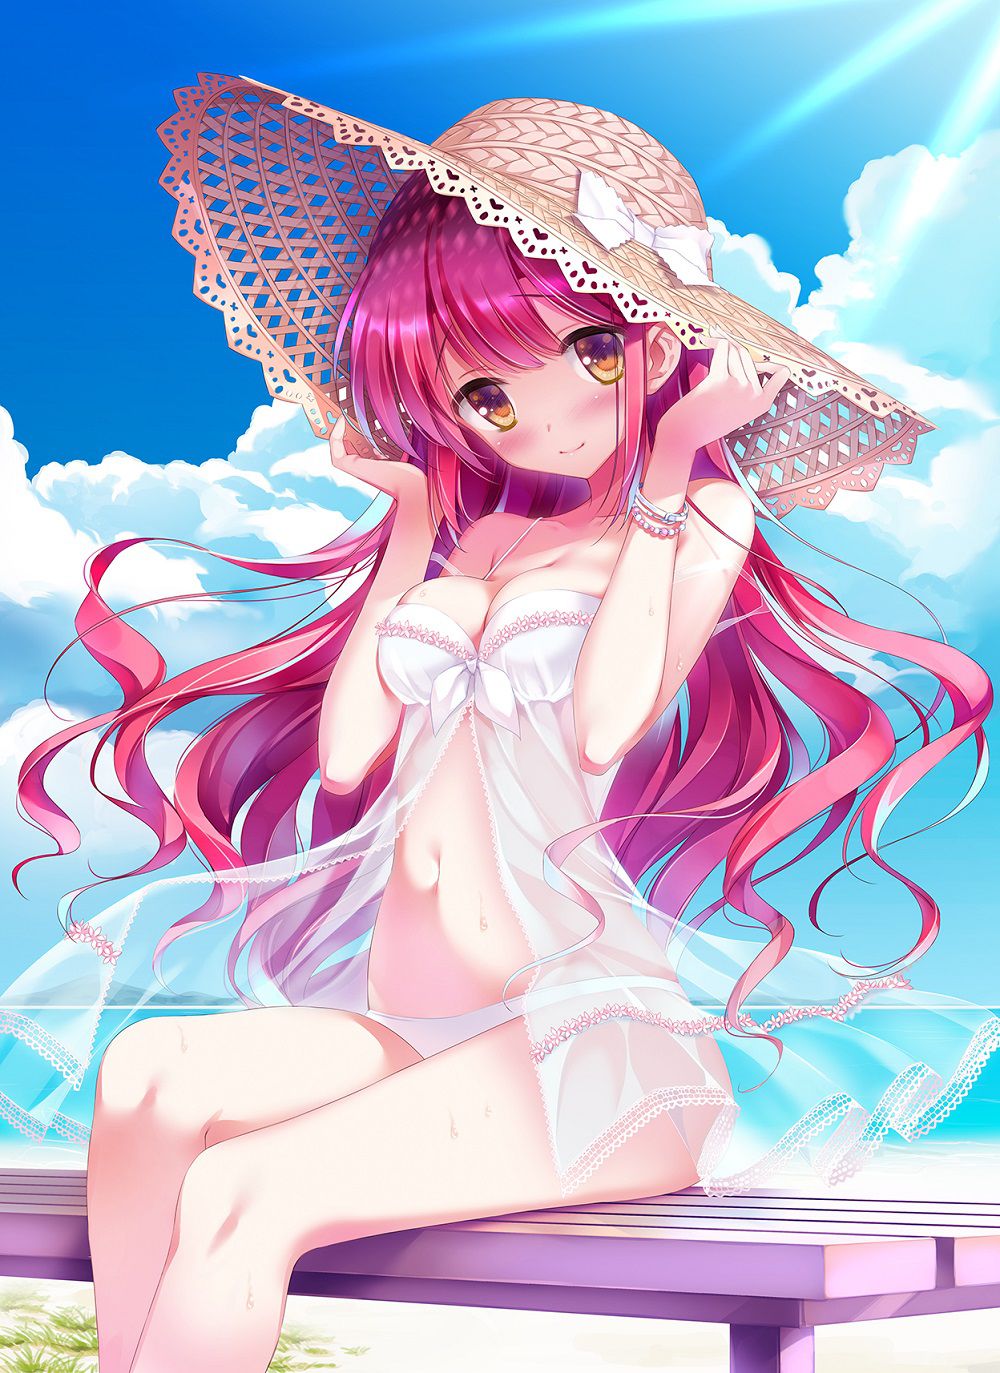 I'm wearing a straw hat 2-d girl image should (32 photos) 20